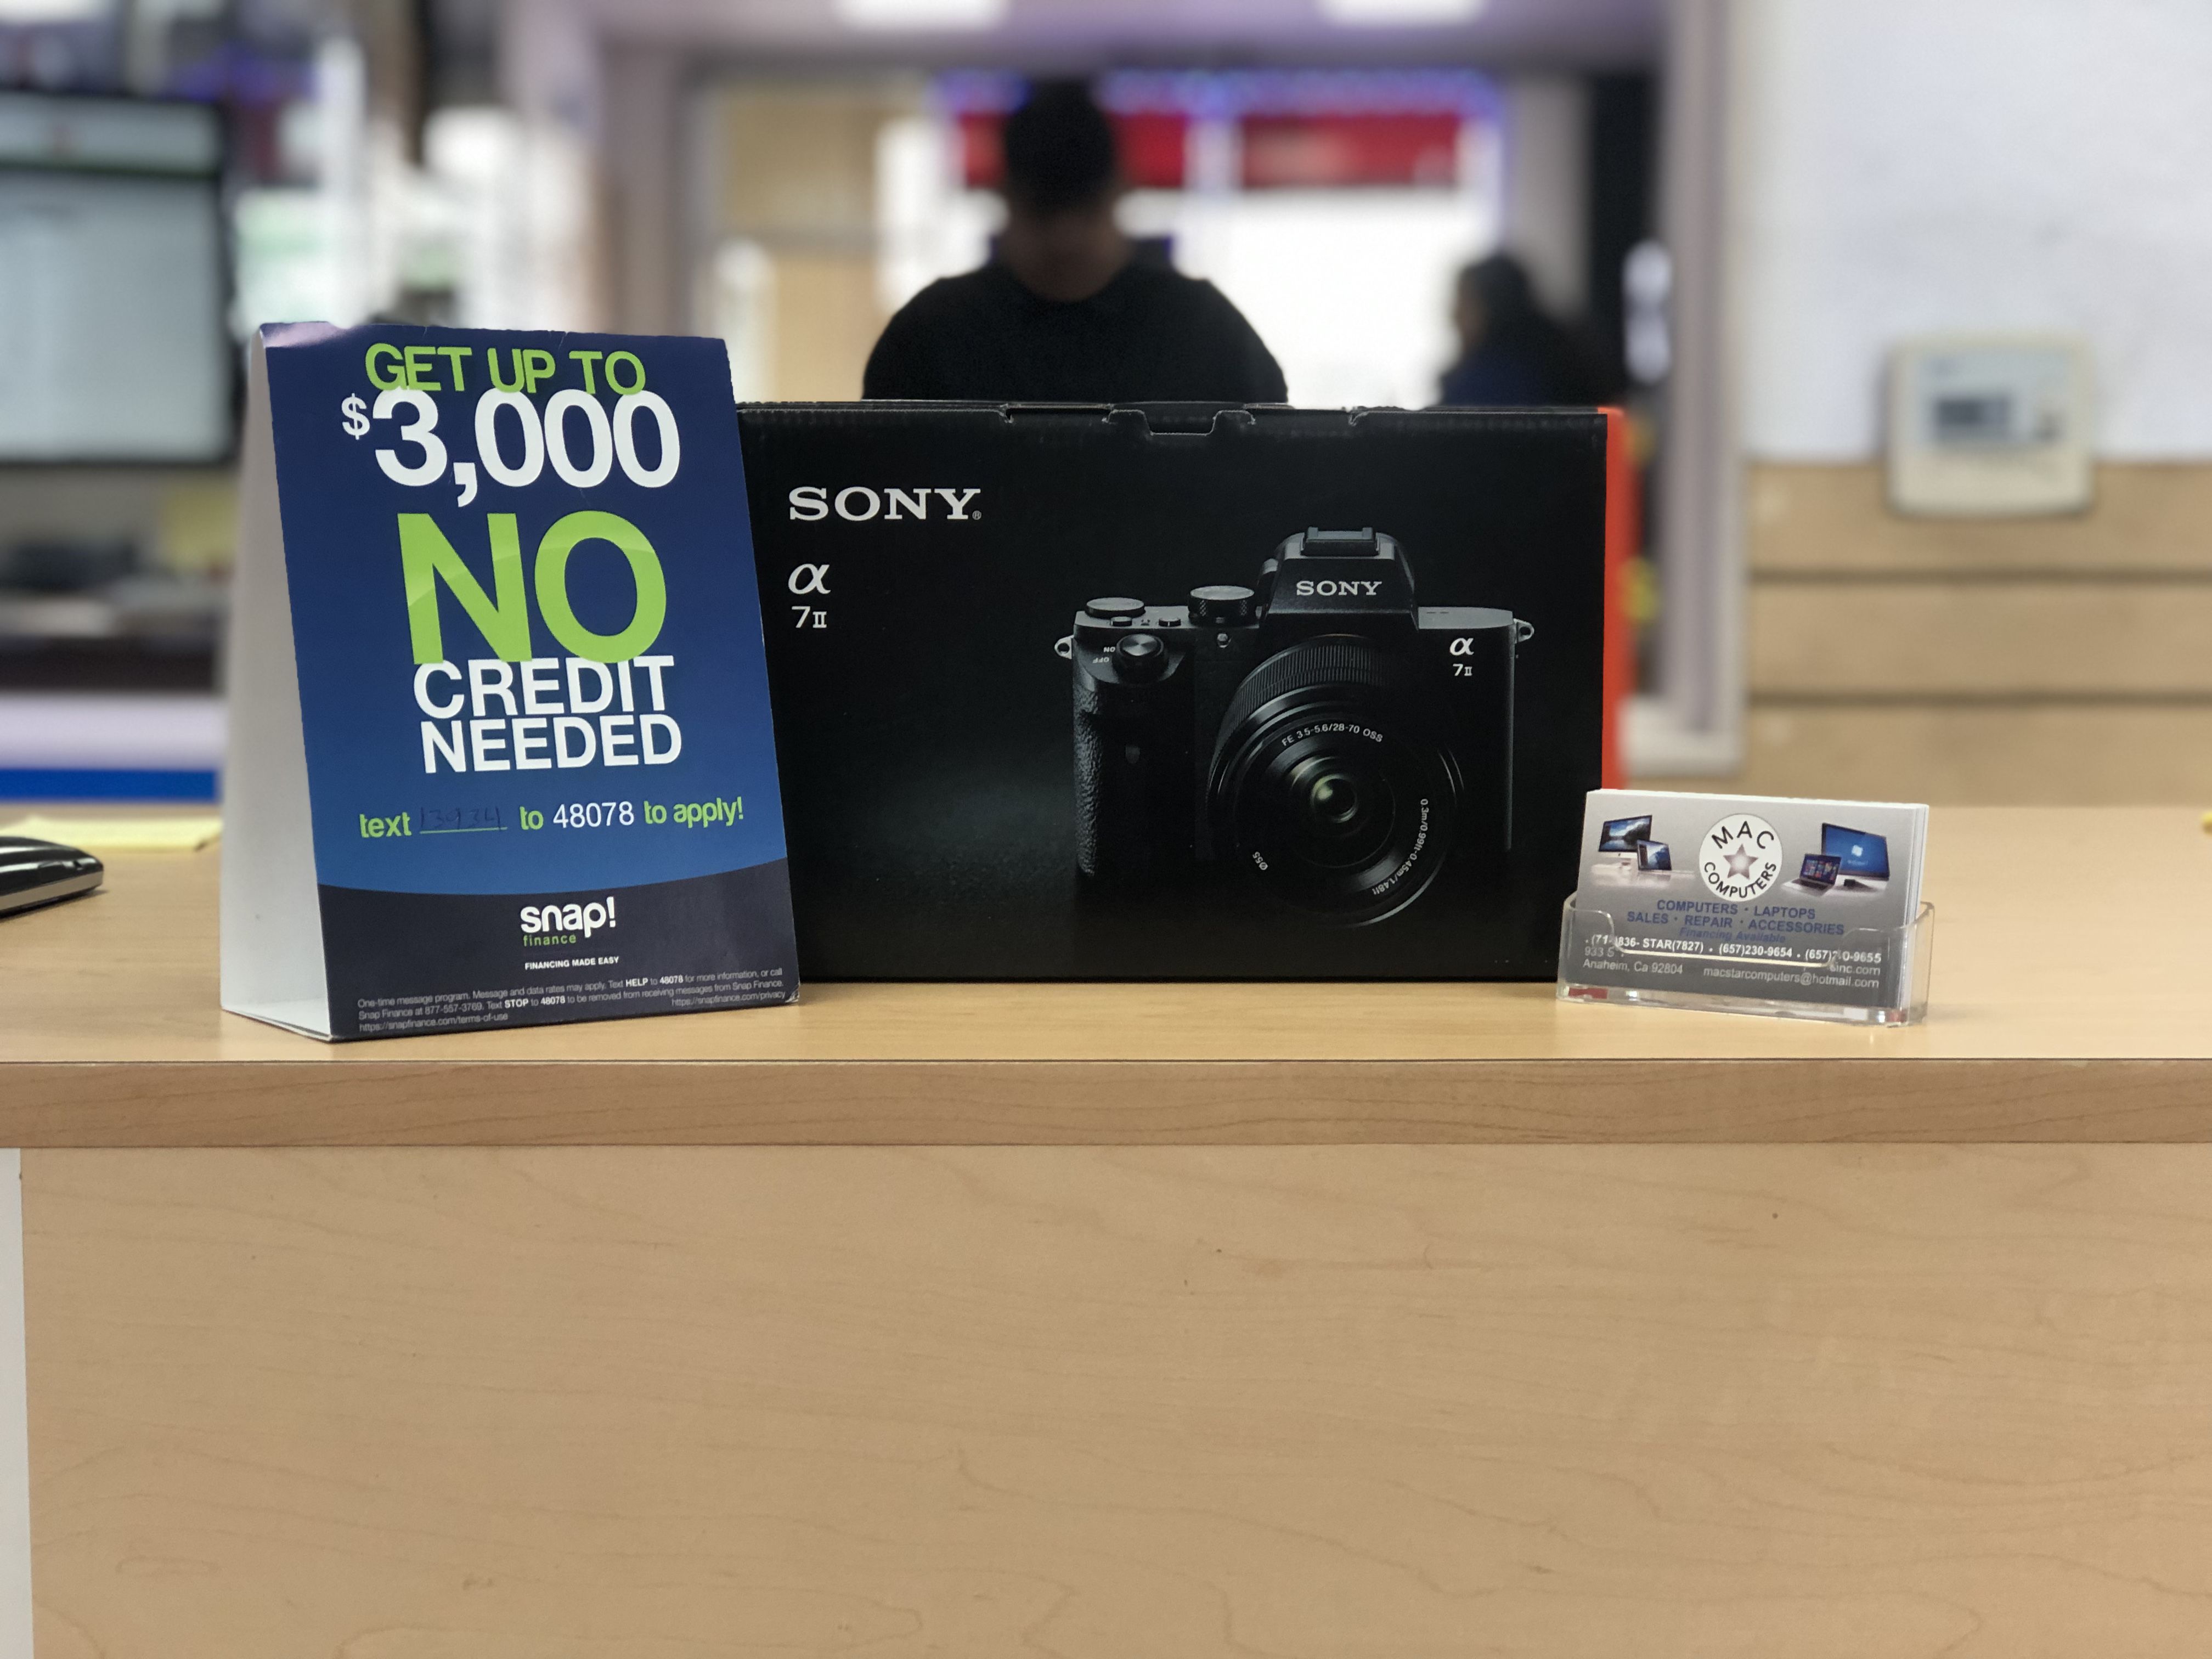 Sony a7iii Digital Mirrorless Camera! (No Credit Needed!!) as low as 39$ down today!